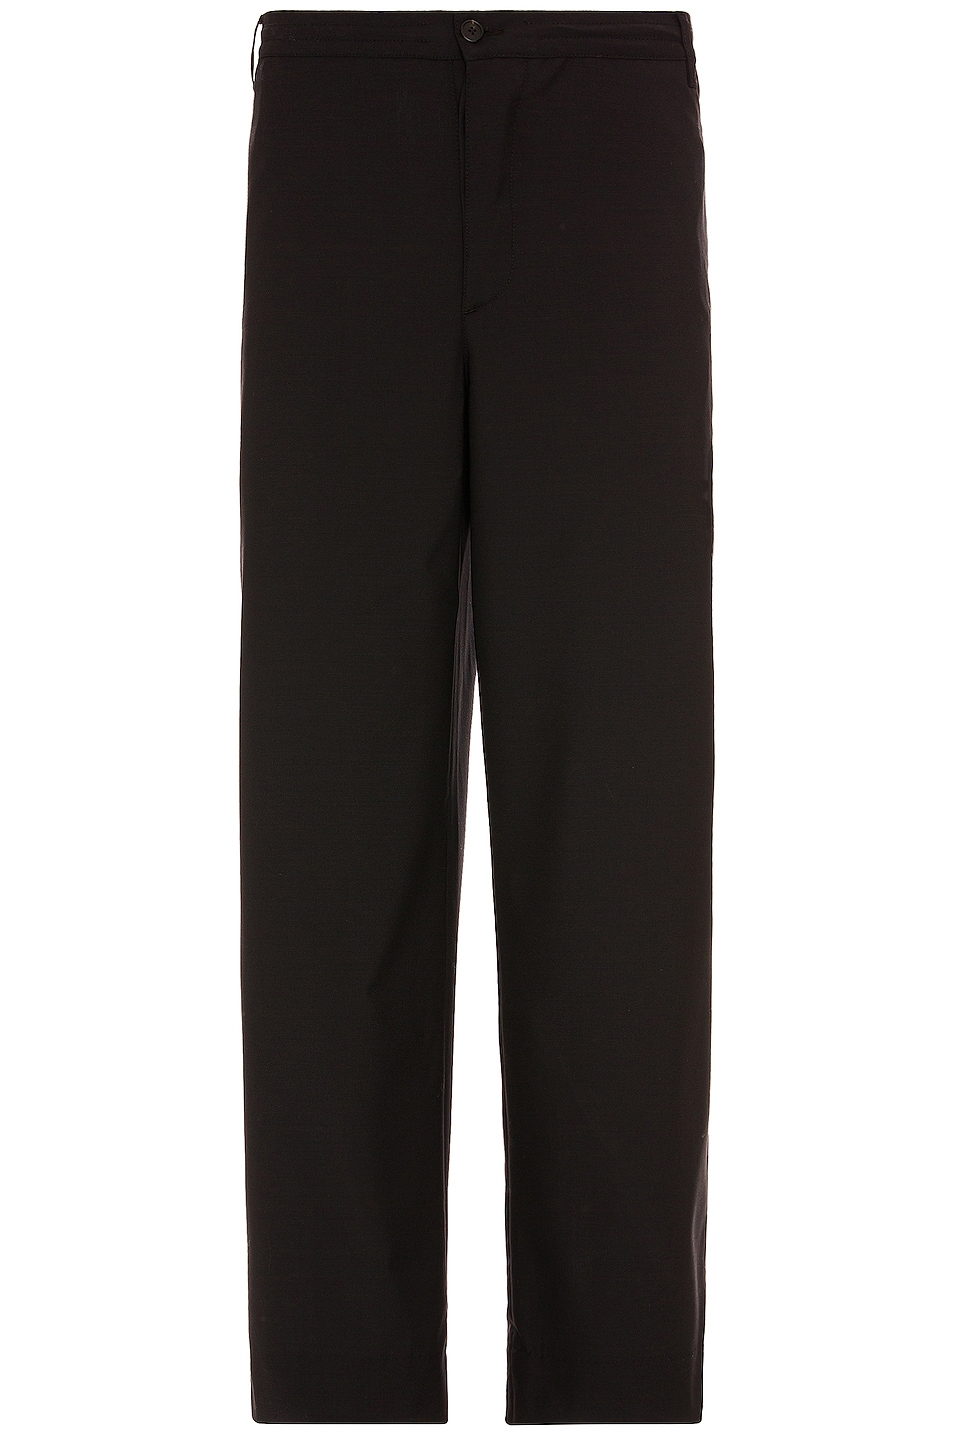 Image 1 of The Row Kenzai Pant in Onyx